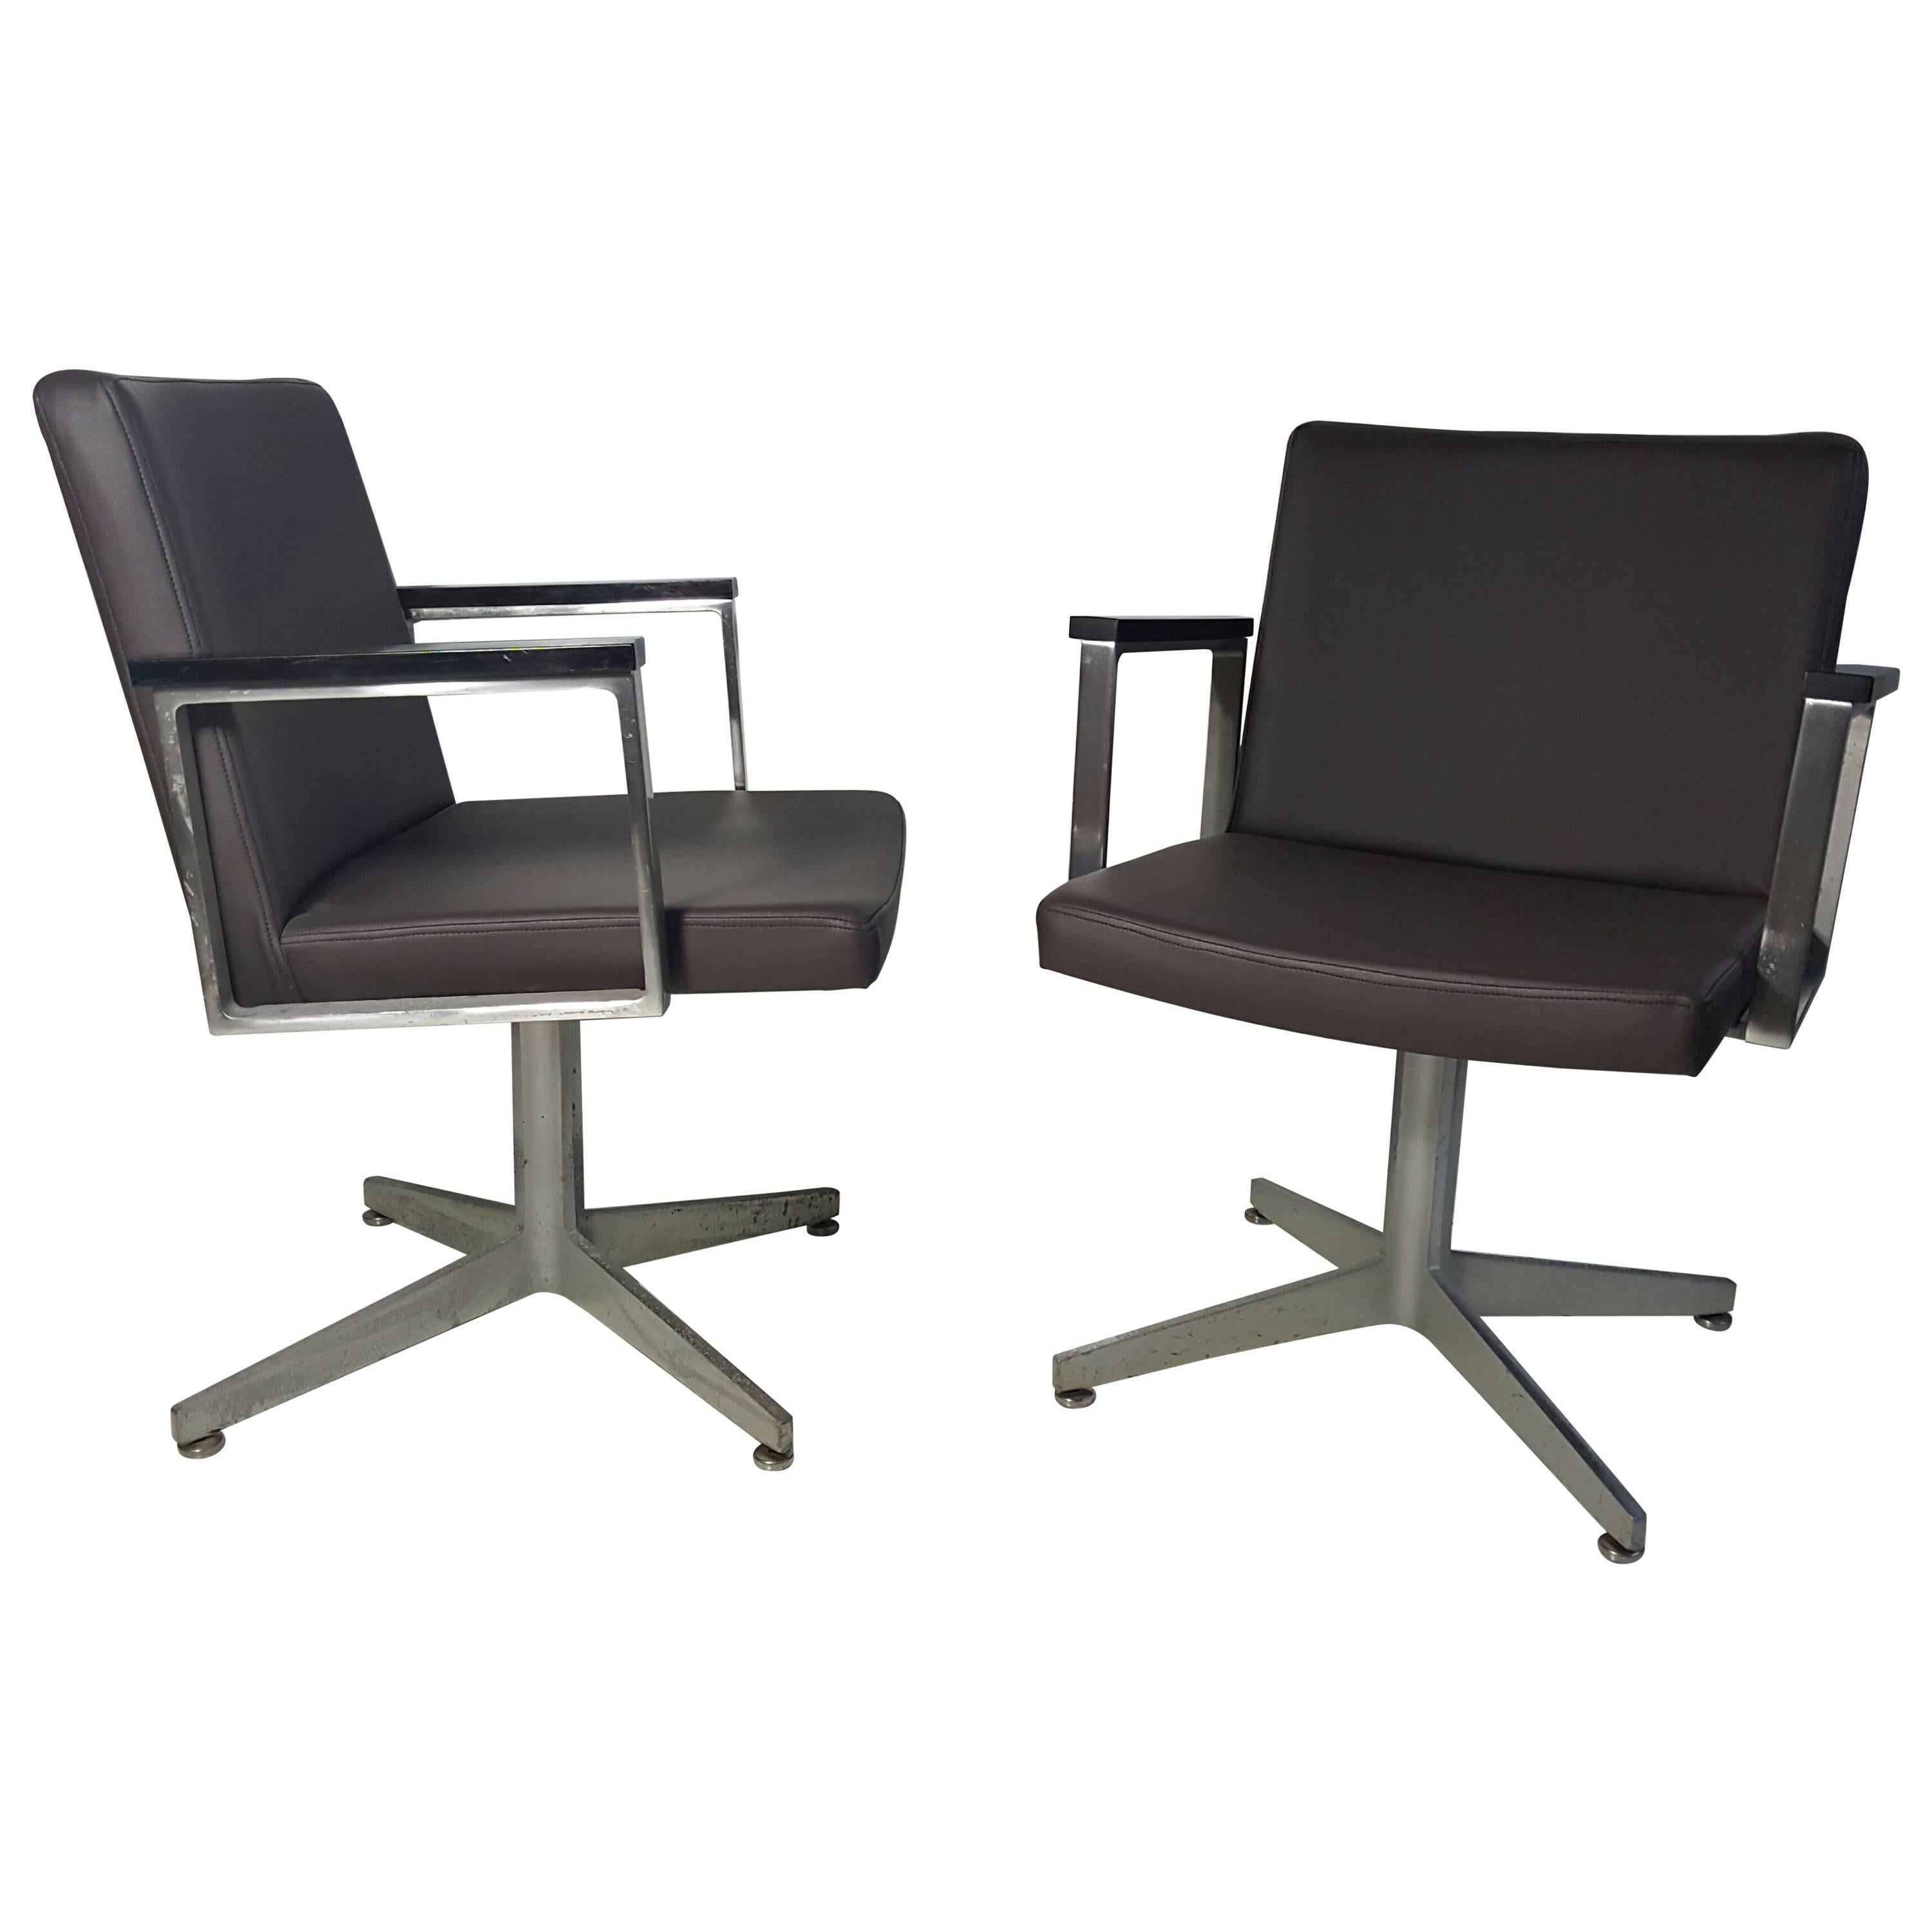 Aluminum and Leather Good Form Armchairs, Modernist, Machine Age For Sale